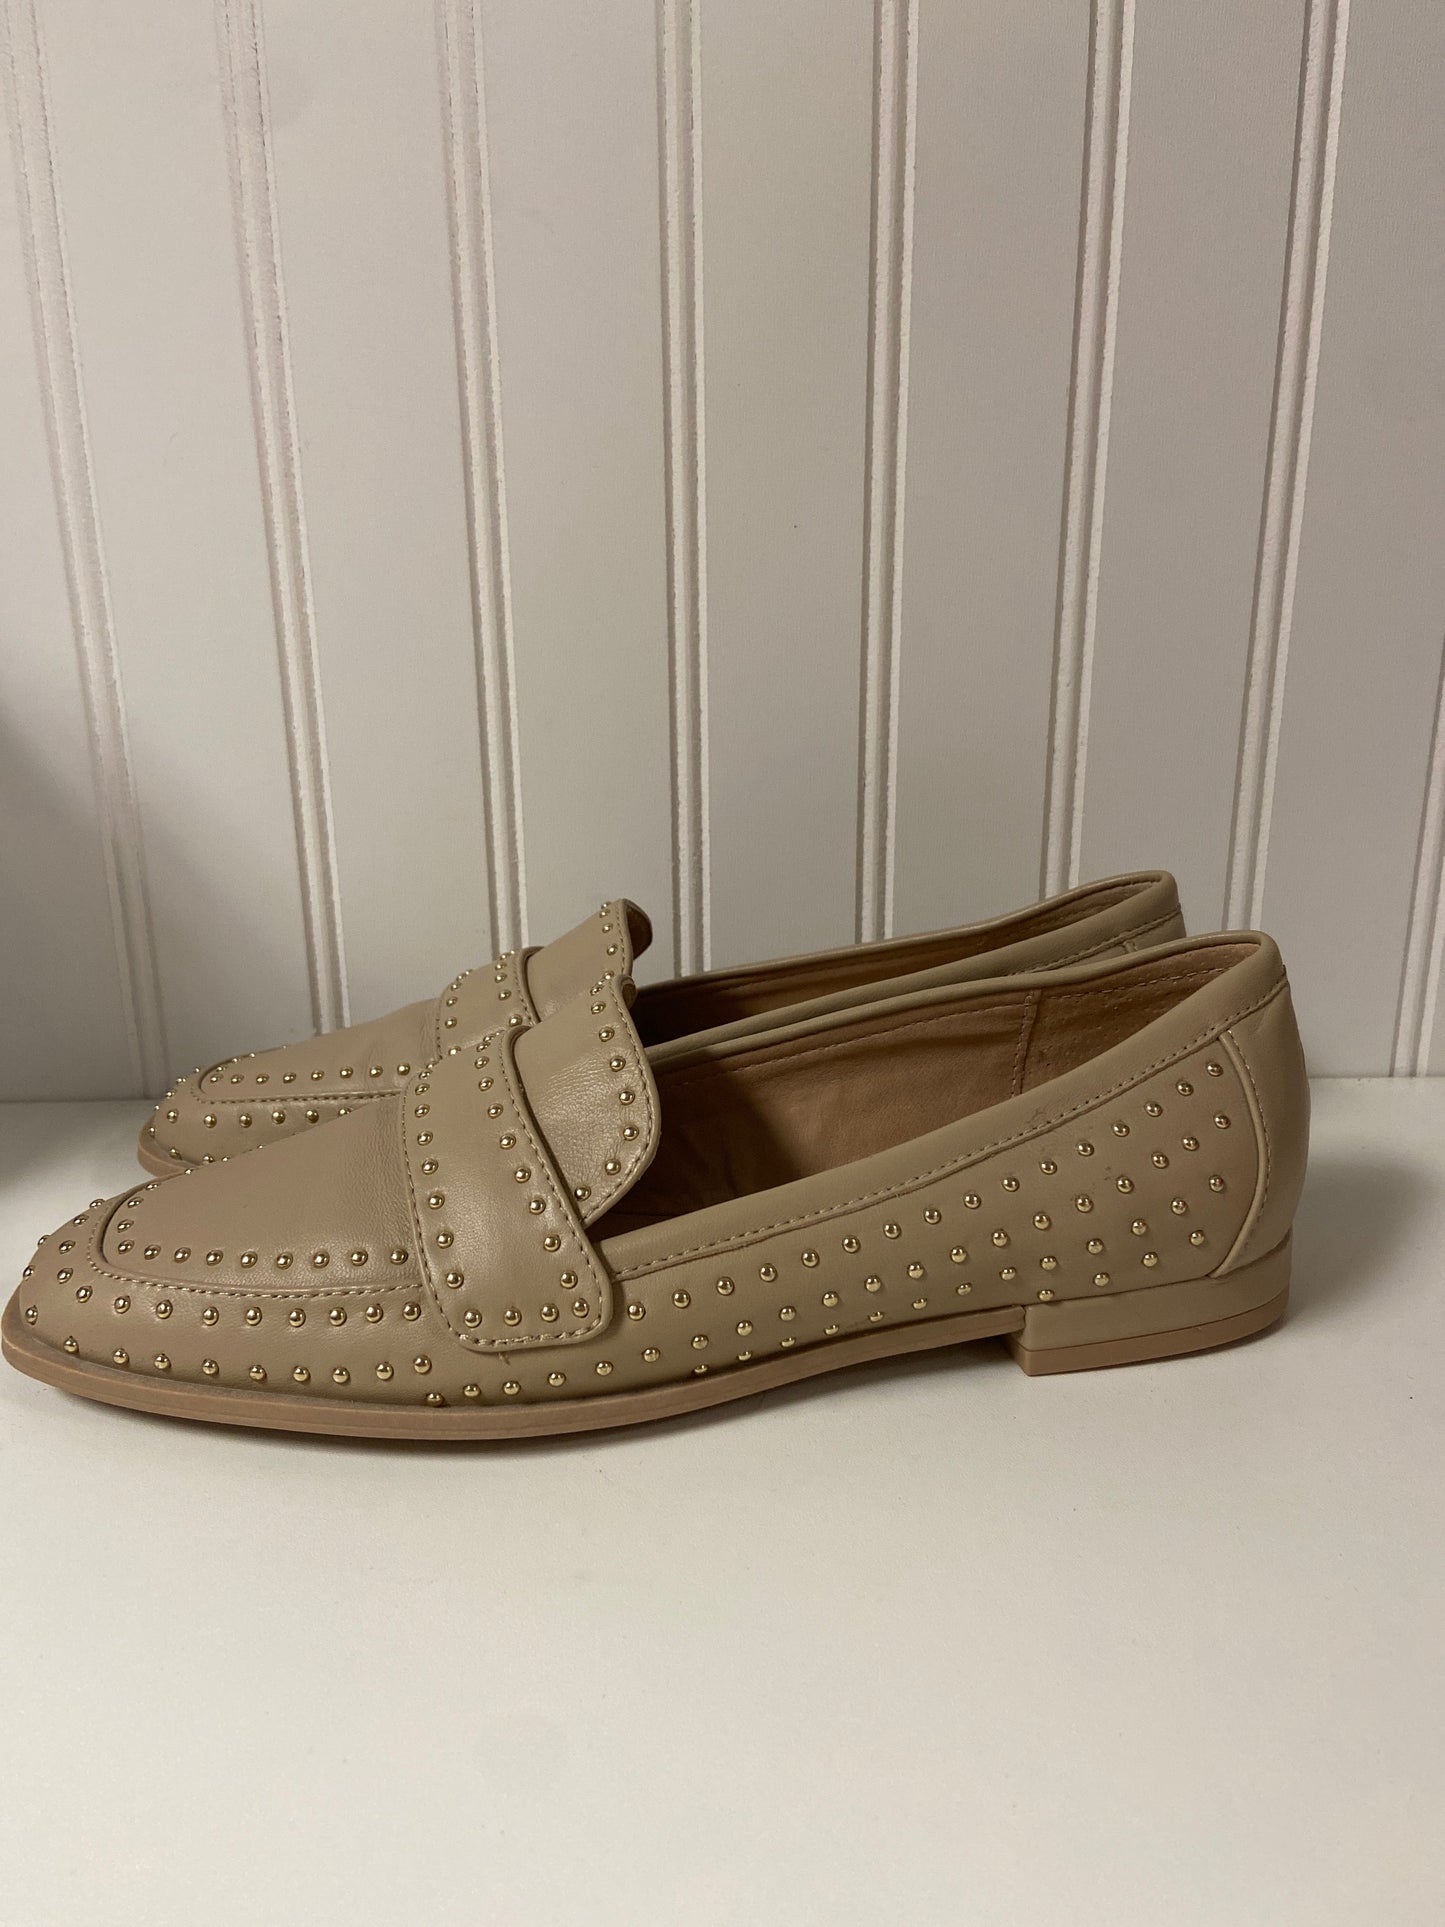 Shoes Flats By Chelsea And Violet  Size: 6